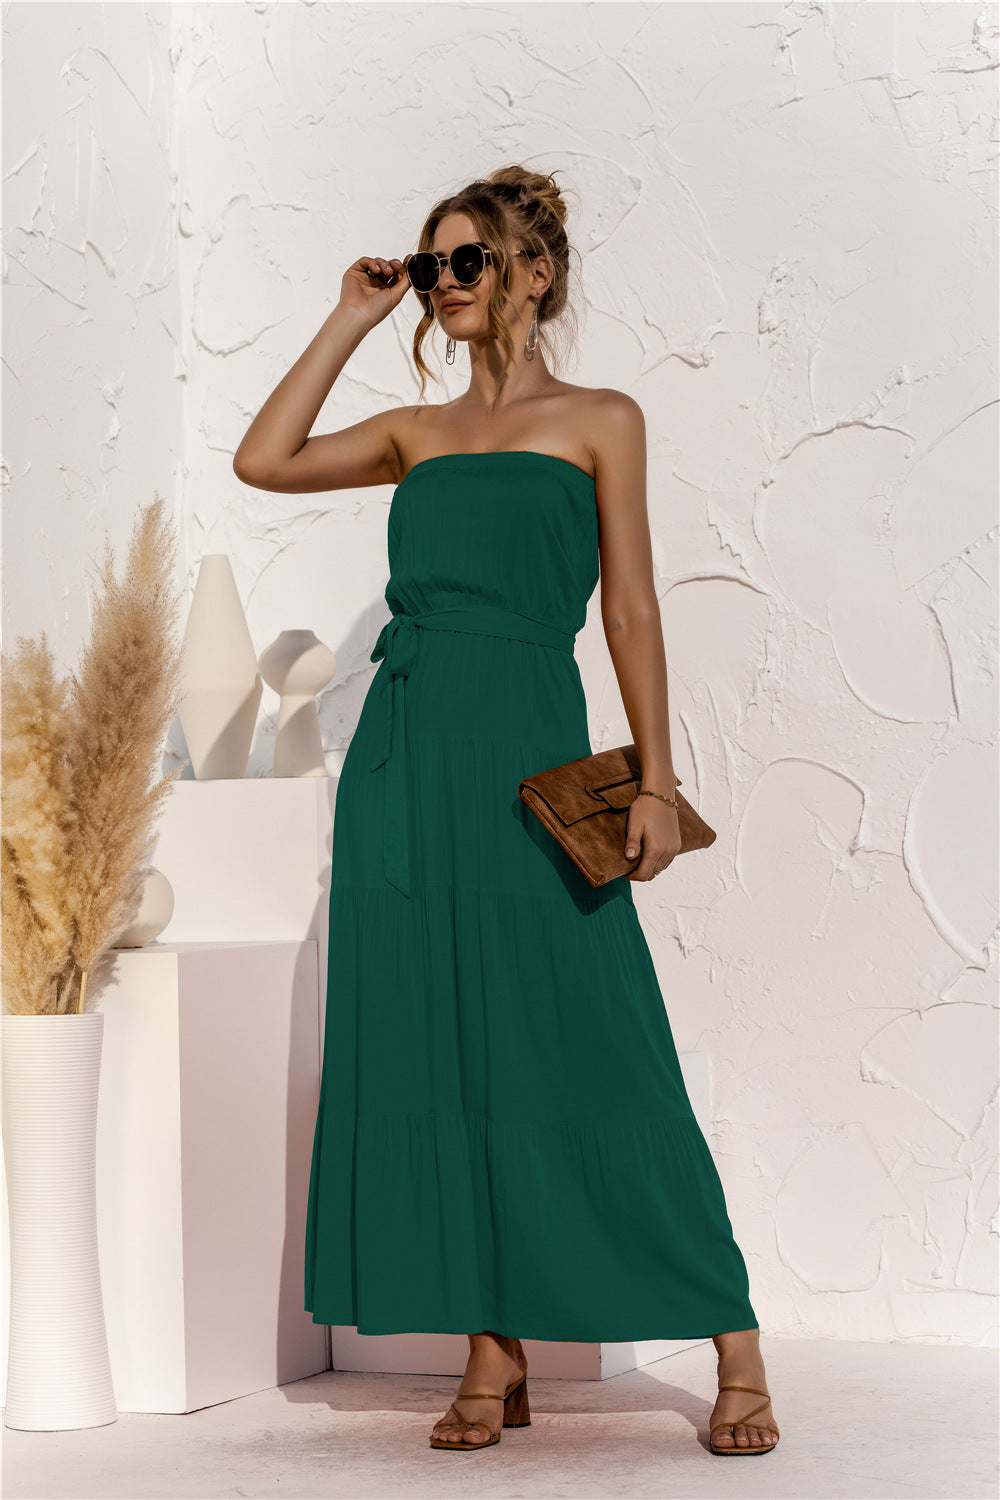 Don’t Mind Me Strapless Maxi Dress - dark green strapless maxi dress with top overlay, and tie waist. #Firefly Lane Boutique1